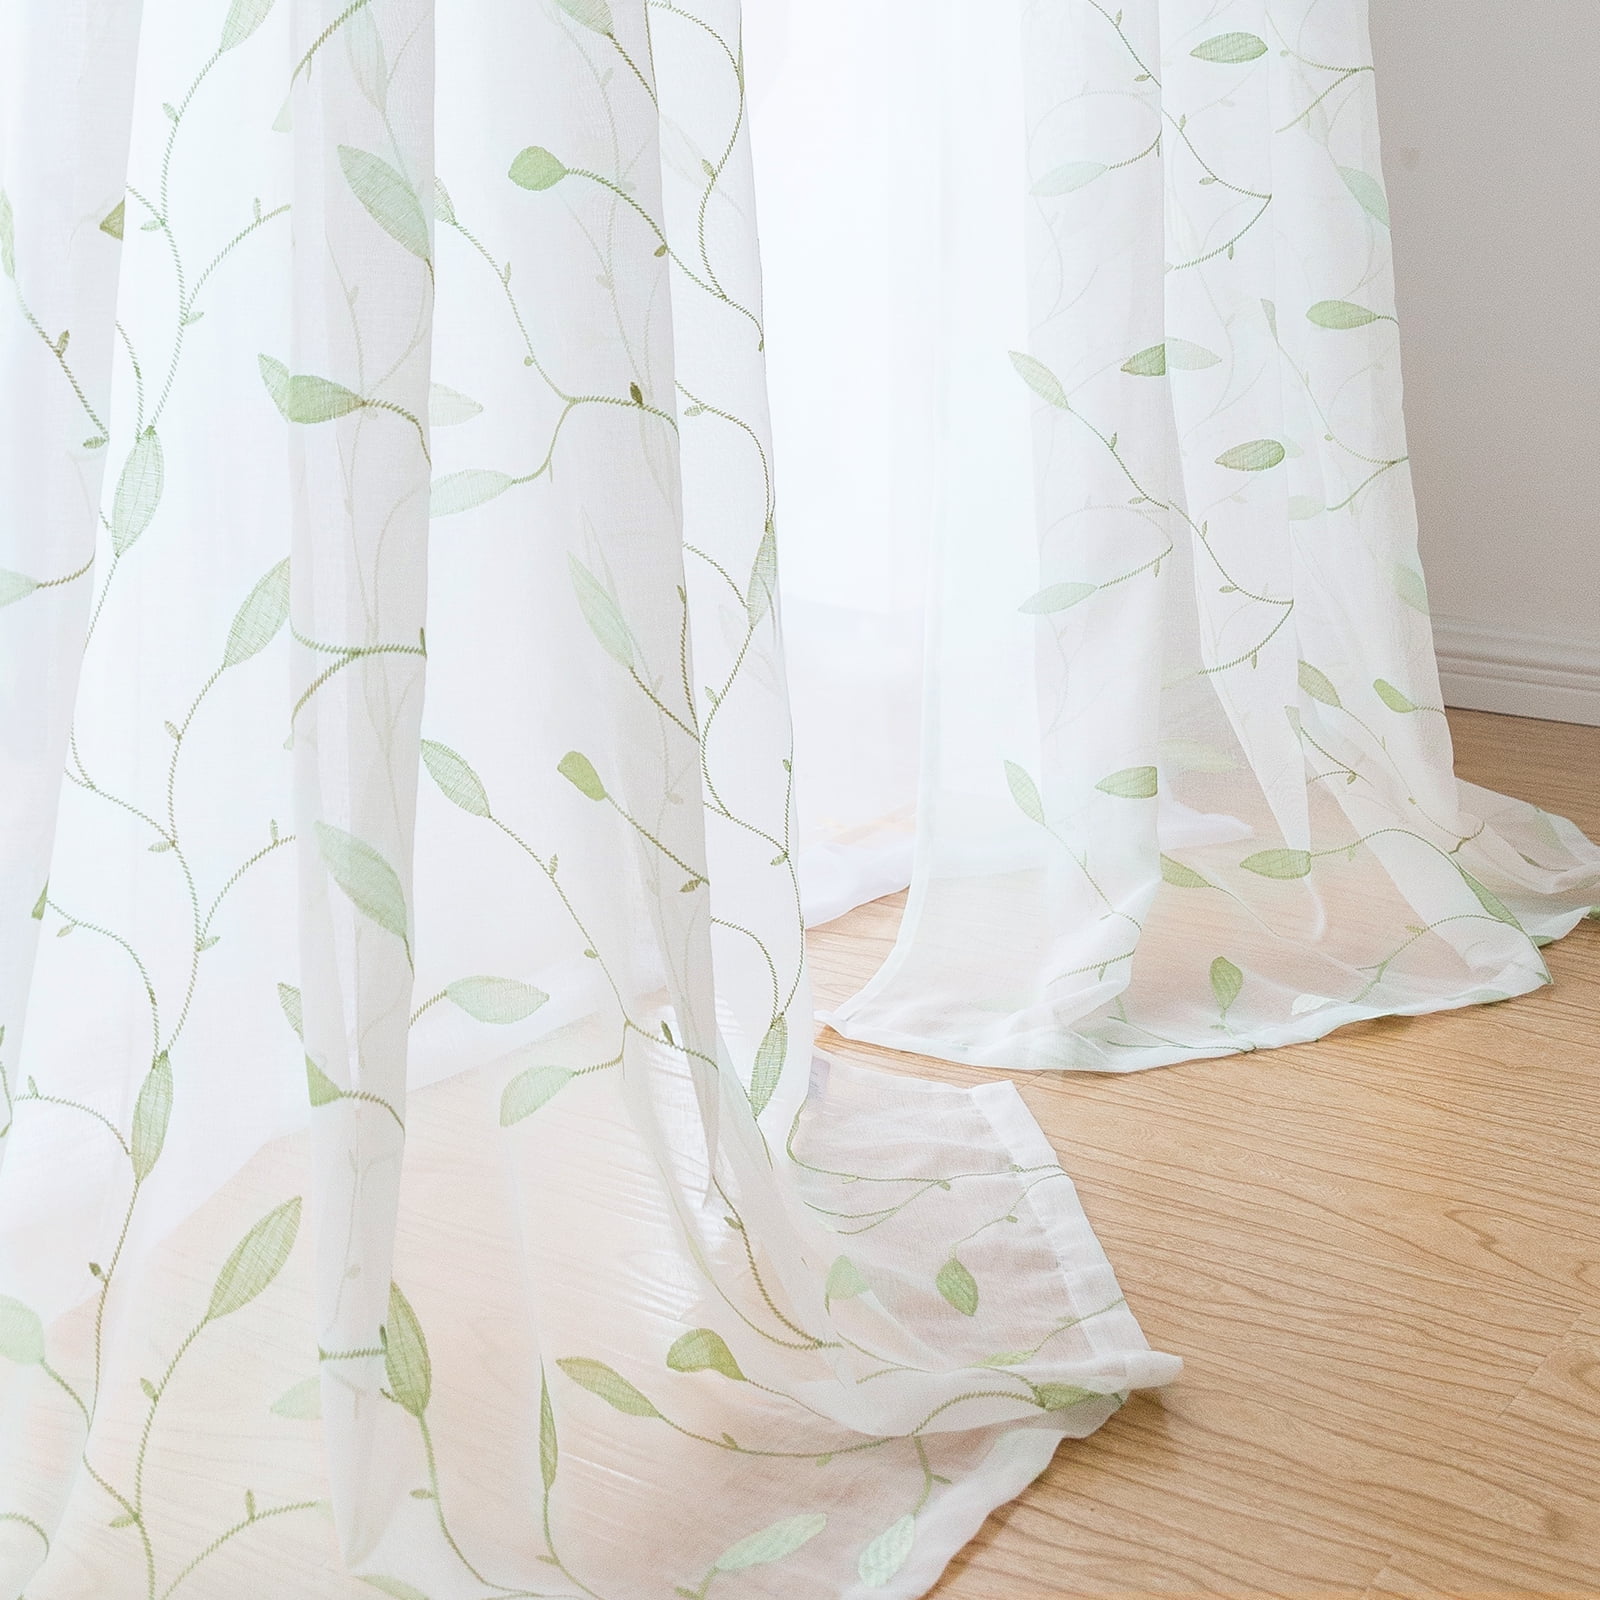 Leaf Curtain Embroidered Sheer Window Voile Panel for Bedroom & Kitchen Rod  Pocket Top (40x63 inch, 1 Piece, Green Leaf White Sheer)